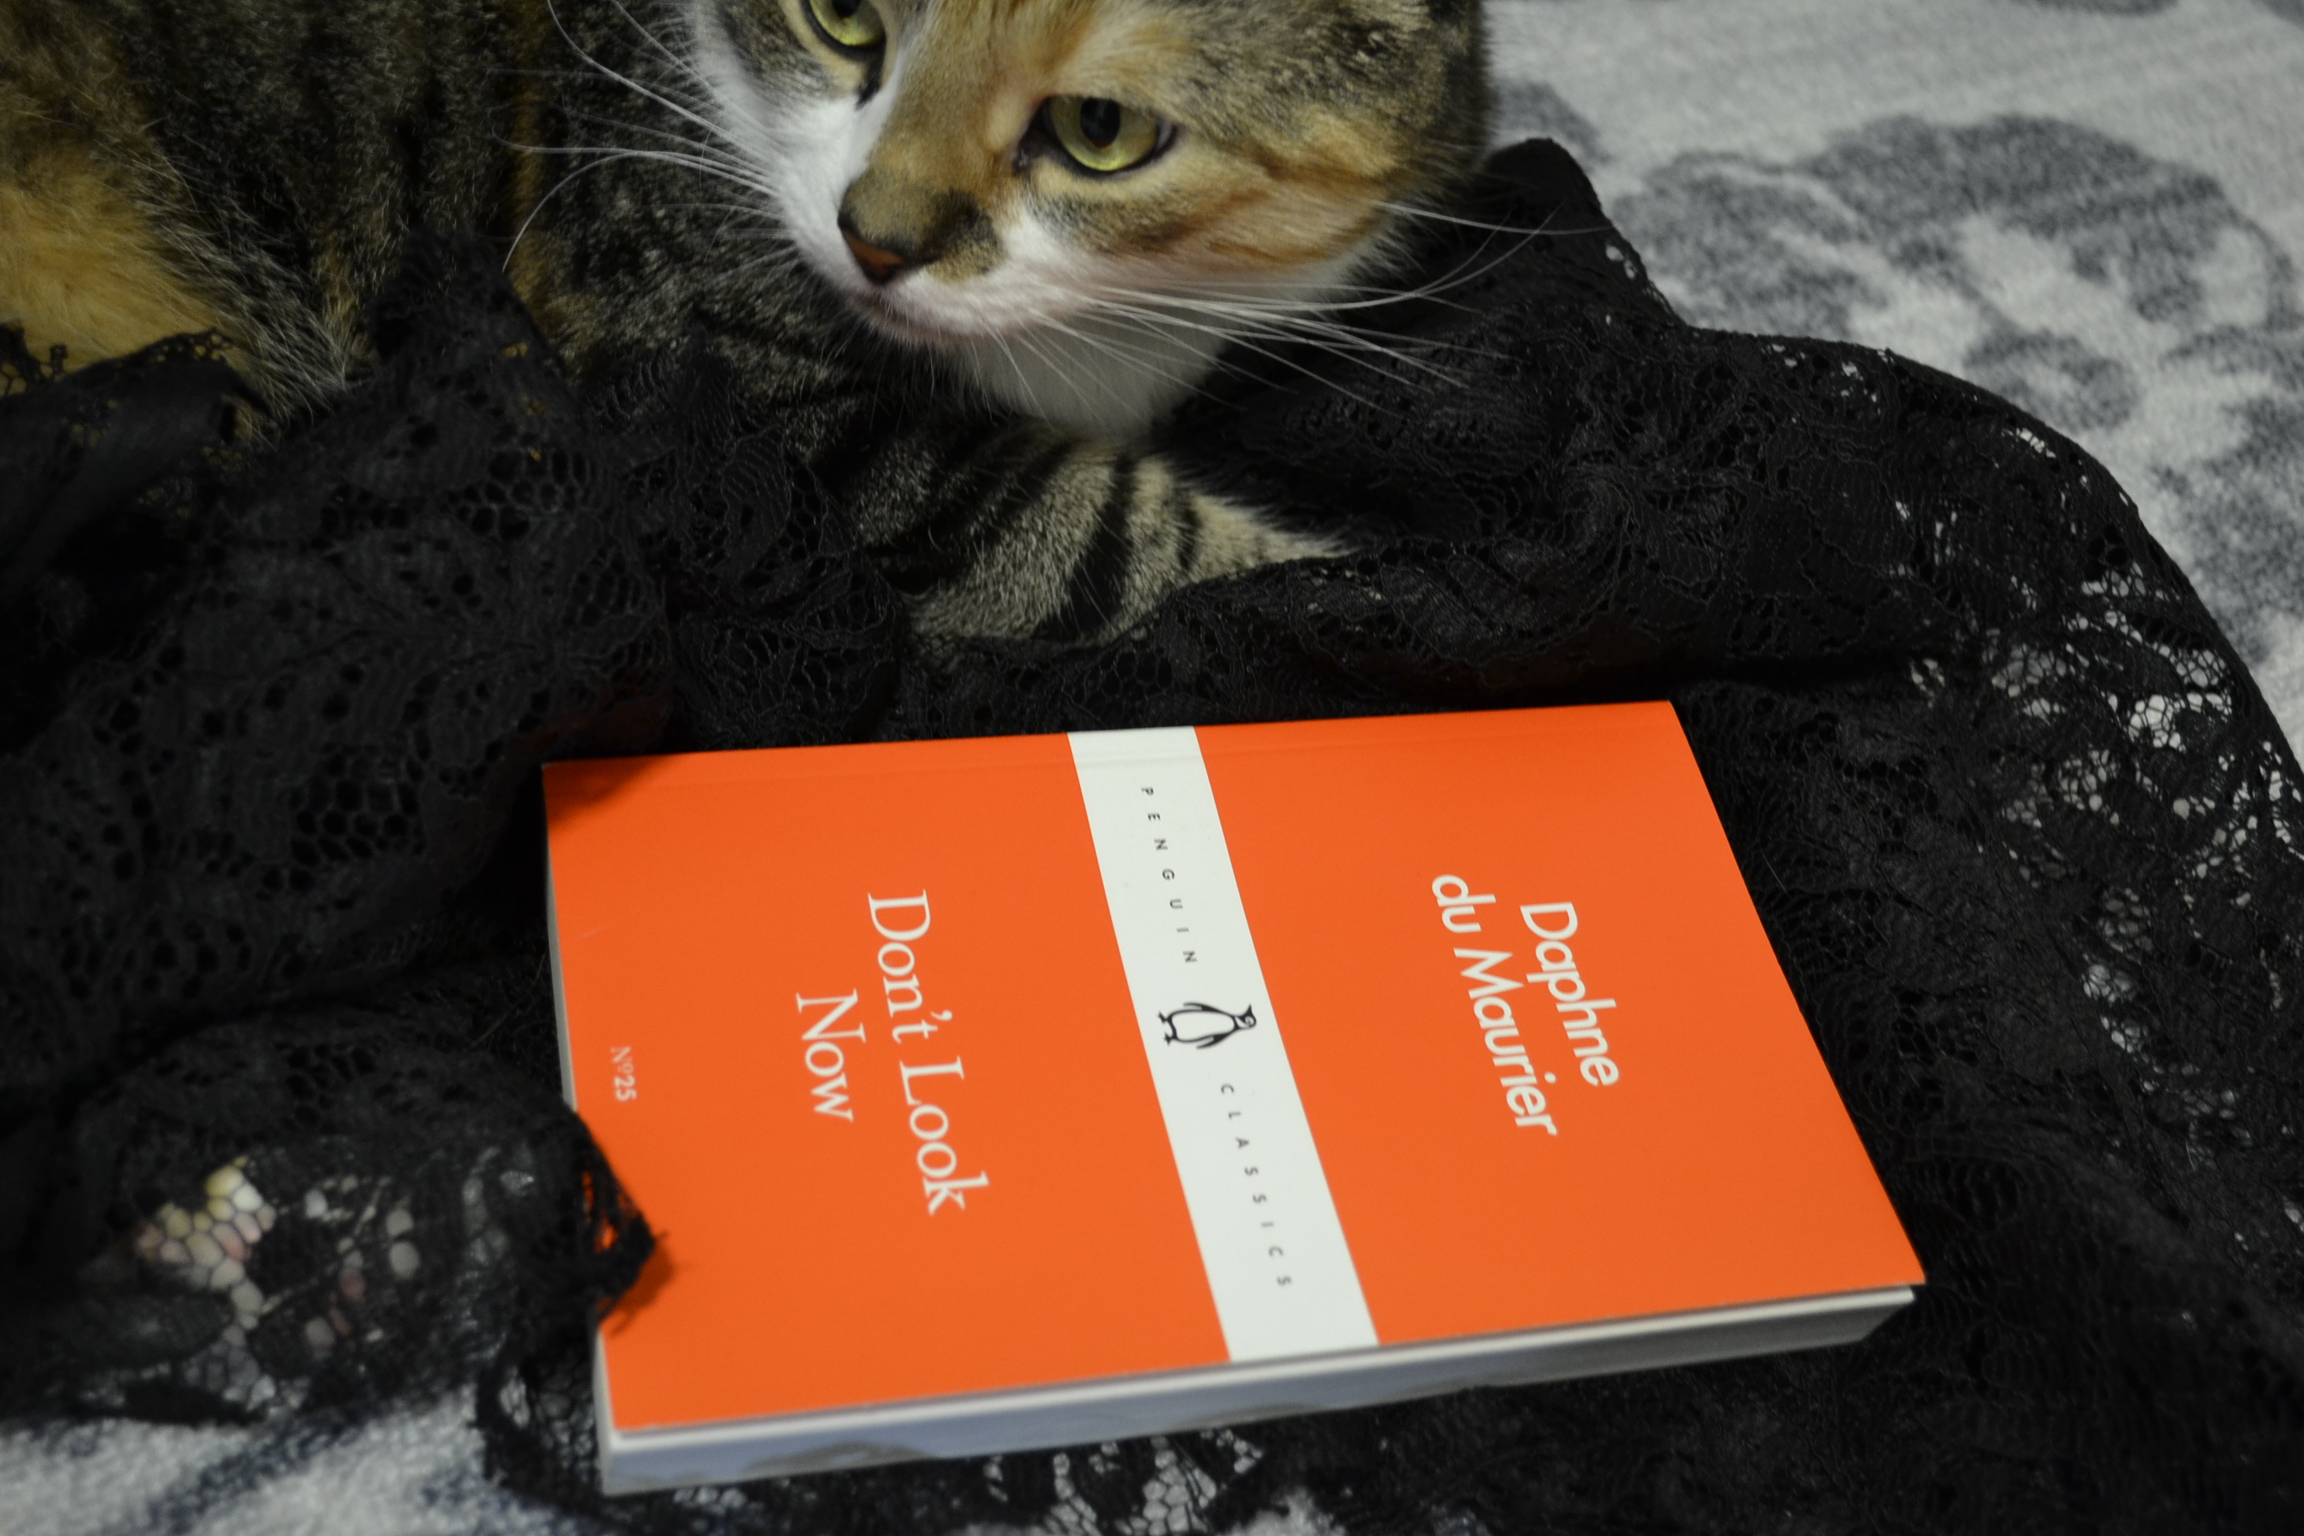 The orange cover of Don't Look Now and a calico tabby.